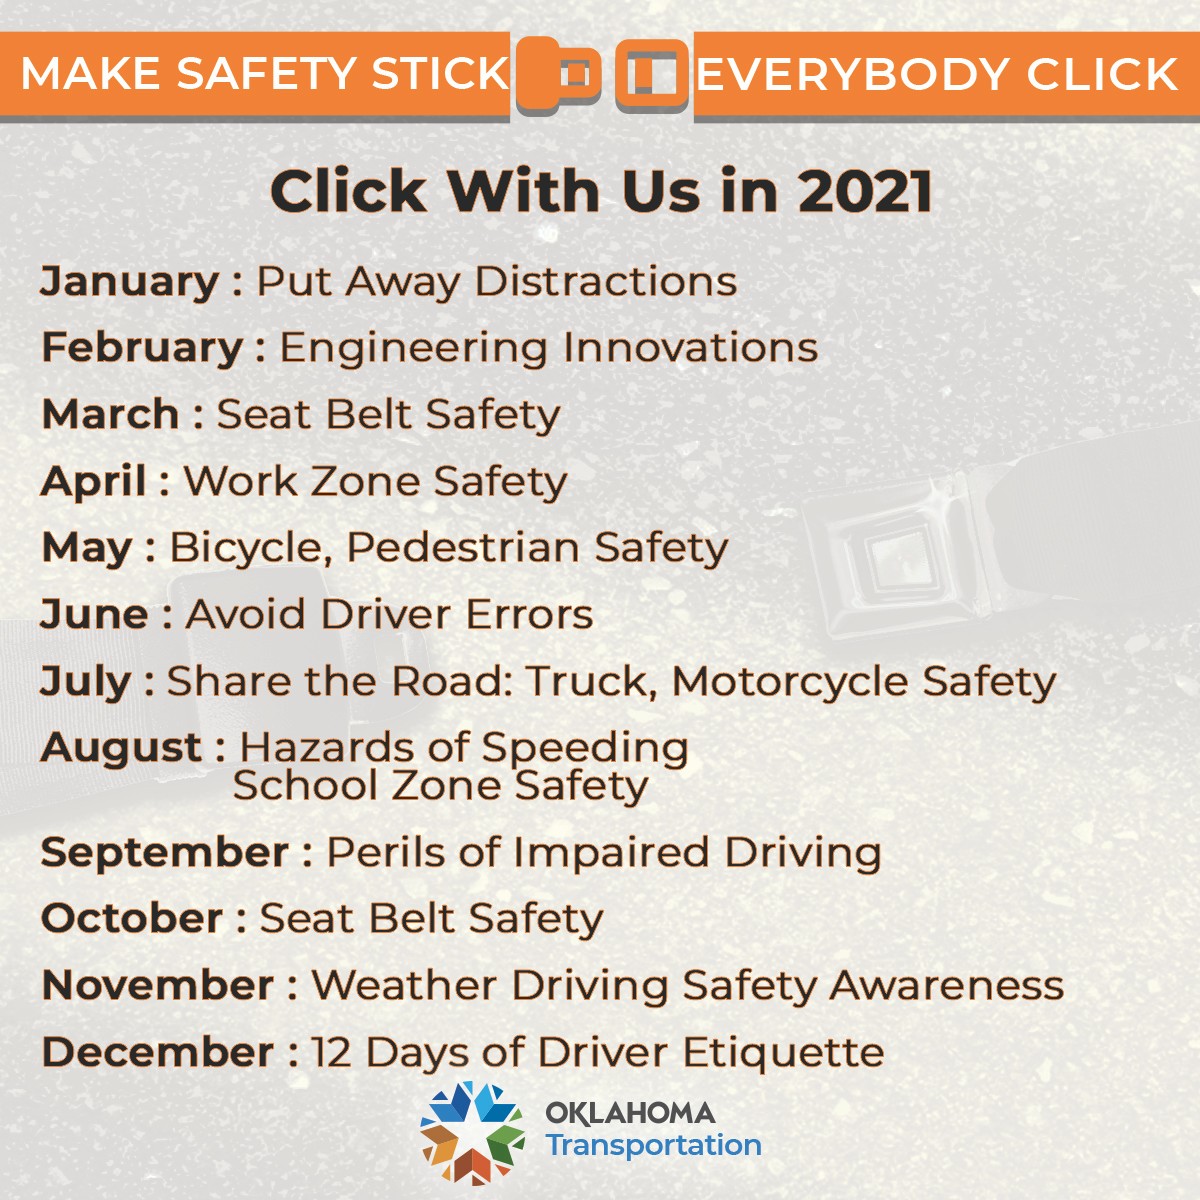 Schedule of safety initiative topics for 2021